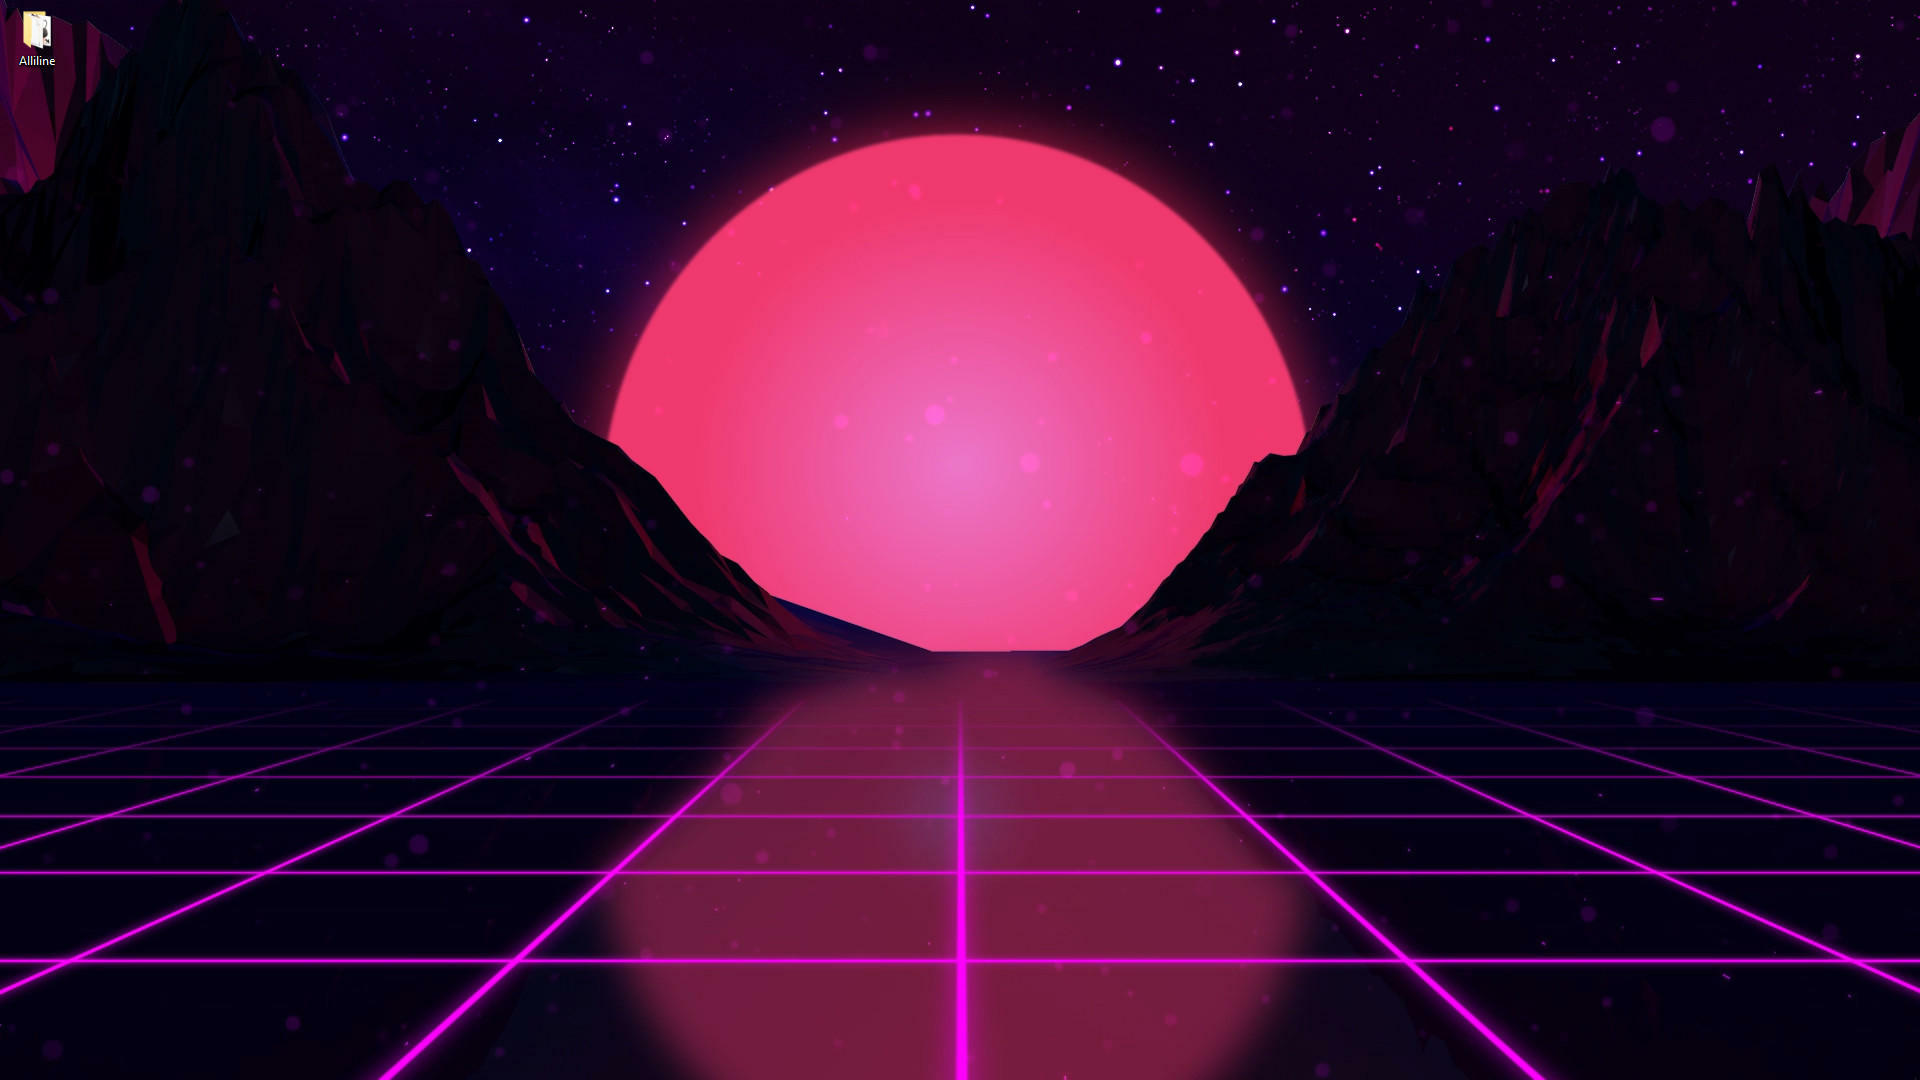 Neon Plane, The Mountain And The Red Moon 3D Live Wallpaper [DOWNLOAD FREE]